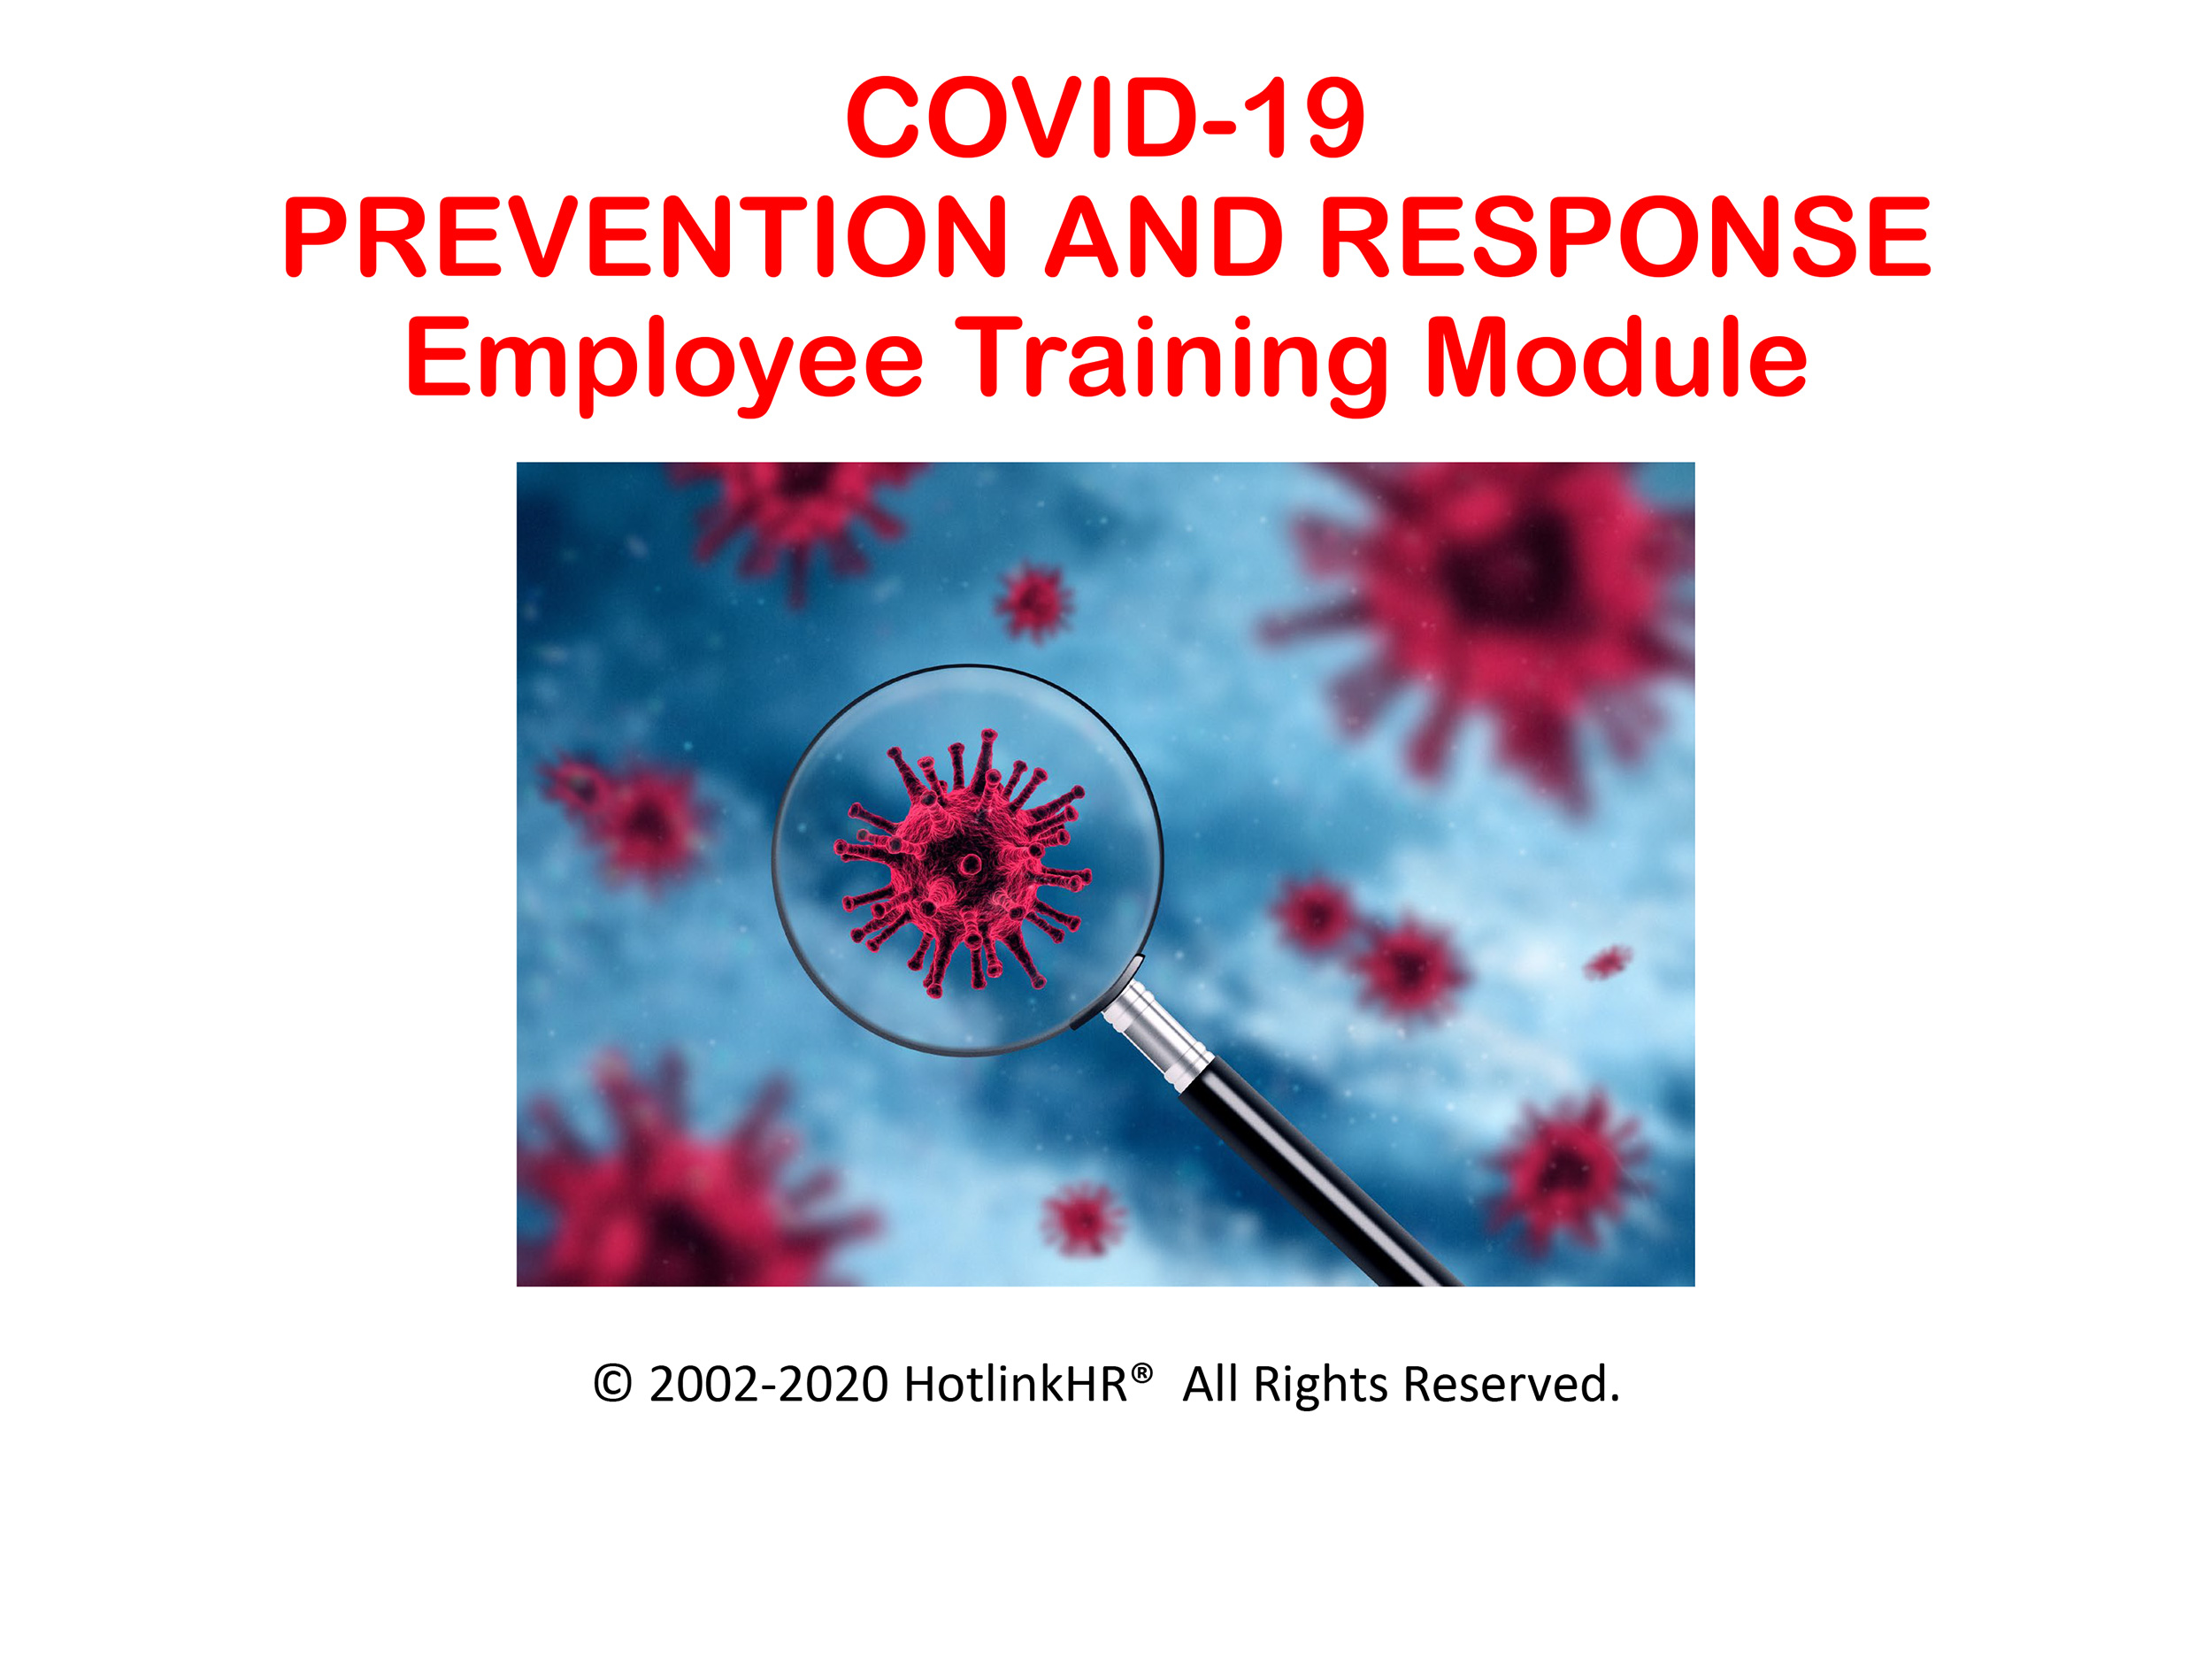 HotlinkHR's Covid-19 Prevention and Response Employee Training Module